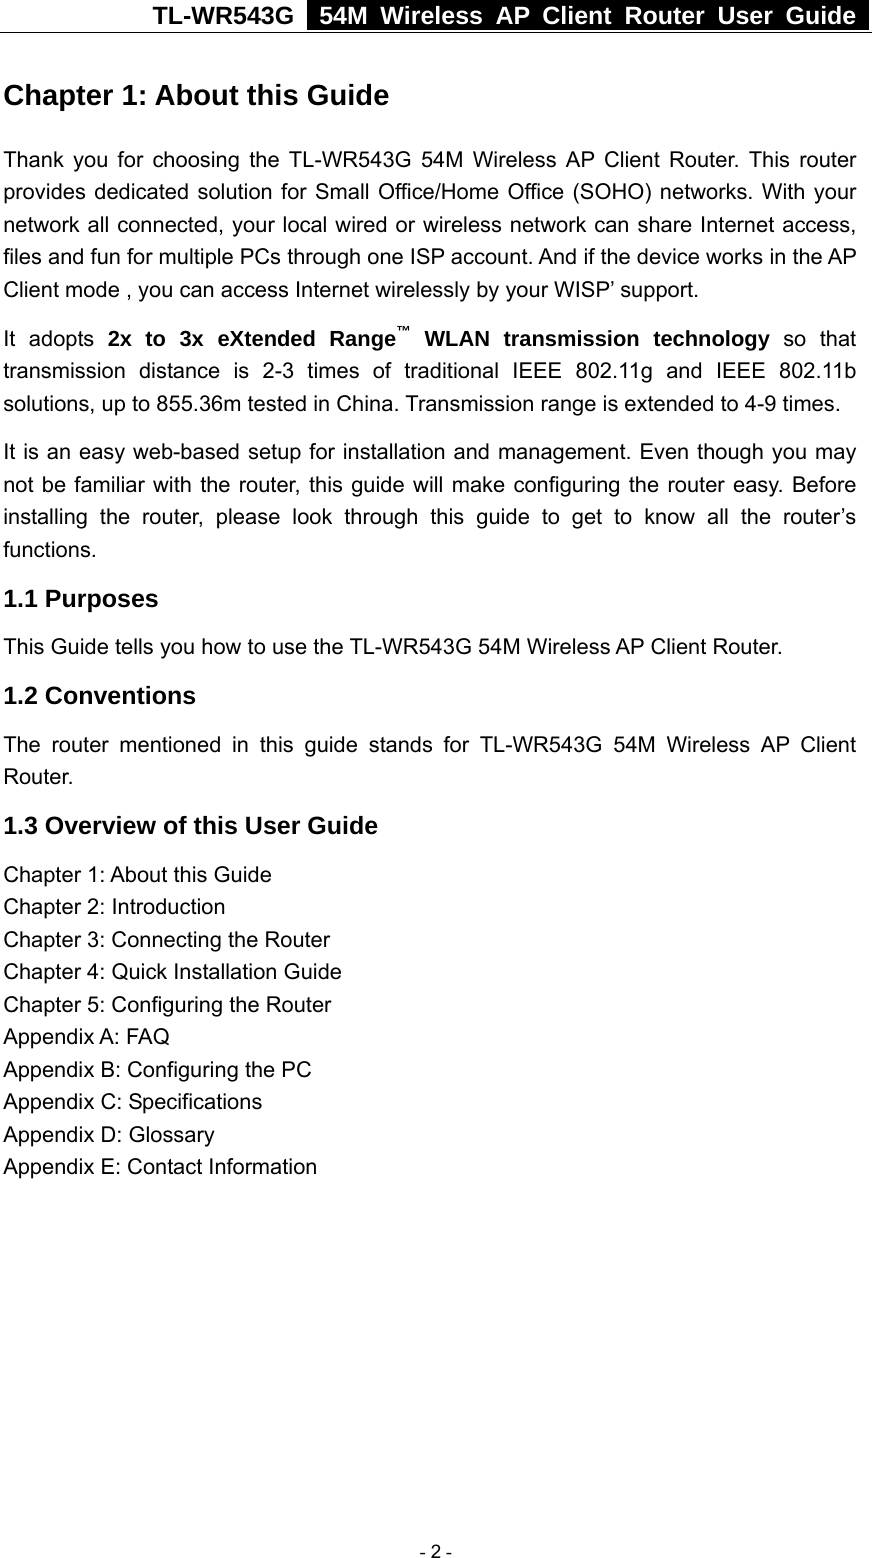 TL-WR543G   54M Wireless AP Client Router User Guide  Chapter 1: About this Guide Thank you for choosing the TL-WR543G 54M Wireless AP Client Router. This router provides dedicated solution for Small Office/Home Office (SOHO) networks. With your network all connected, your local wired or wireless network can share Internet access, files and fun for multiple PCs through one ISP account. And if the device works in the AP Client mode , you can access Internet wirelessly by your WISP’ support.   It adopts 2x to 3x eXtended Range™ WLAN transmission technology so that transmission distance is 2-3 times of traditional IEEE 802.11g and IEEE 802.11b solutions, up to 855.36m tested in China. Transmission range is extended to 4-9 times. It is an easy web-based setup for installation and management. Even though you may not be familiar with the router, this guide will make configuring the router easy. Before installing the router, please look through this guide to get to know all the router’s functions. 1.1 Purposes This Guide tells you how to use the TL-WR543G 54M Wireless AP Client Router.   1.2 Conventions The router mentioned in this guide stands for TL-WR543G 54M Wireless AP Client Router. 1.3 Overview of this User Guide Chapter 1: About this Guide Chapter 2: Introduction Chapter 3: Connecting the Router Chapter 4: Quick Installation Guide Chapter 5: Configuring the Router Appendix A: FAQ Appendix B: Configuring the PC Appendix C: Specifications Appendix D: Glossary Appendix E: Contact Information  - 2 - 